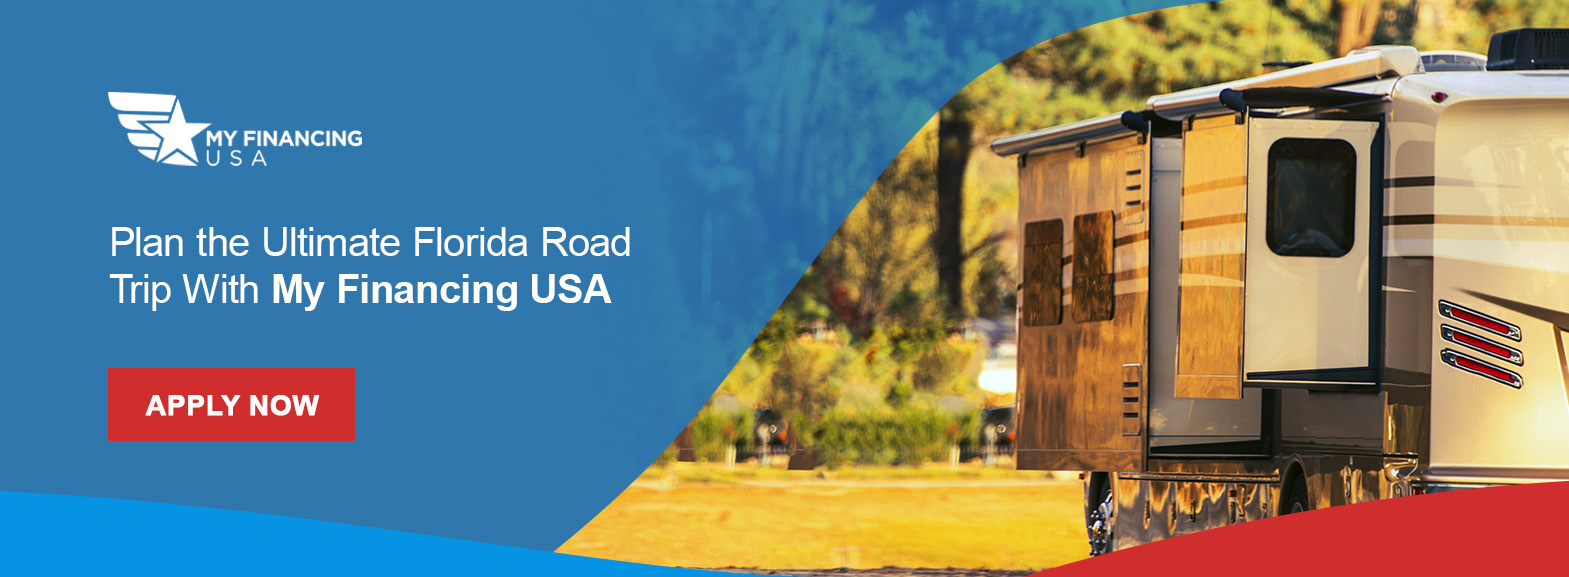 Plan the Ultimate Florida Road Trip With My Financing USA. Apply now!